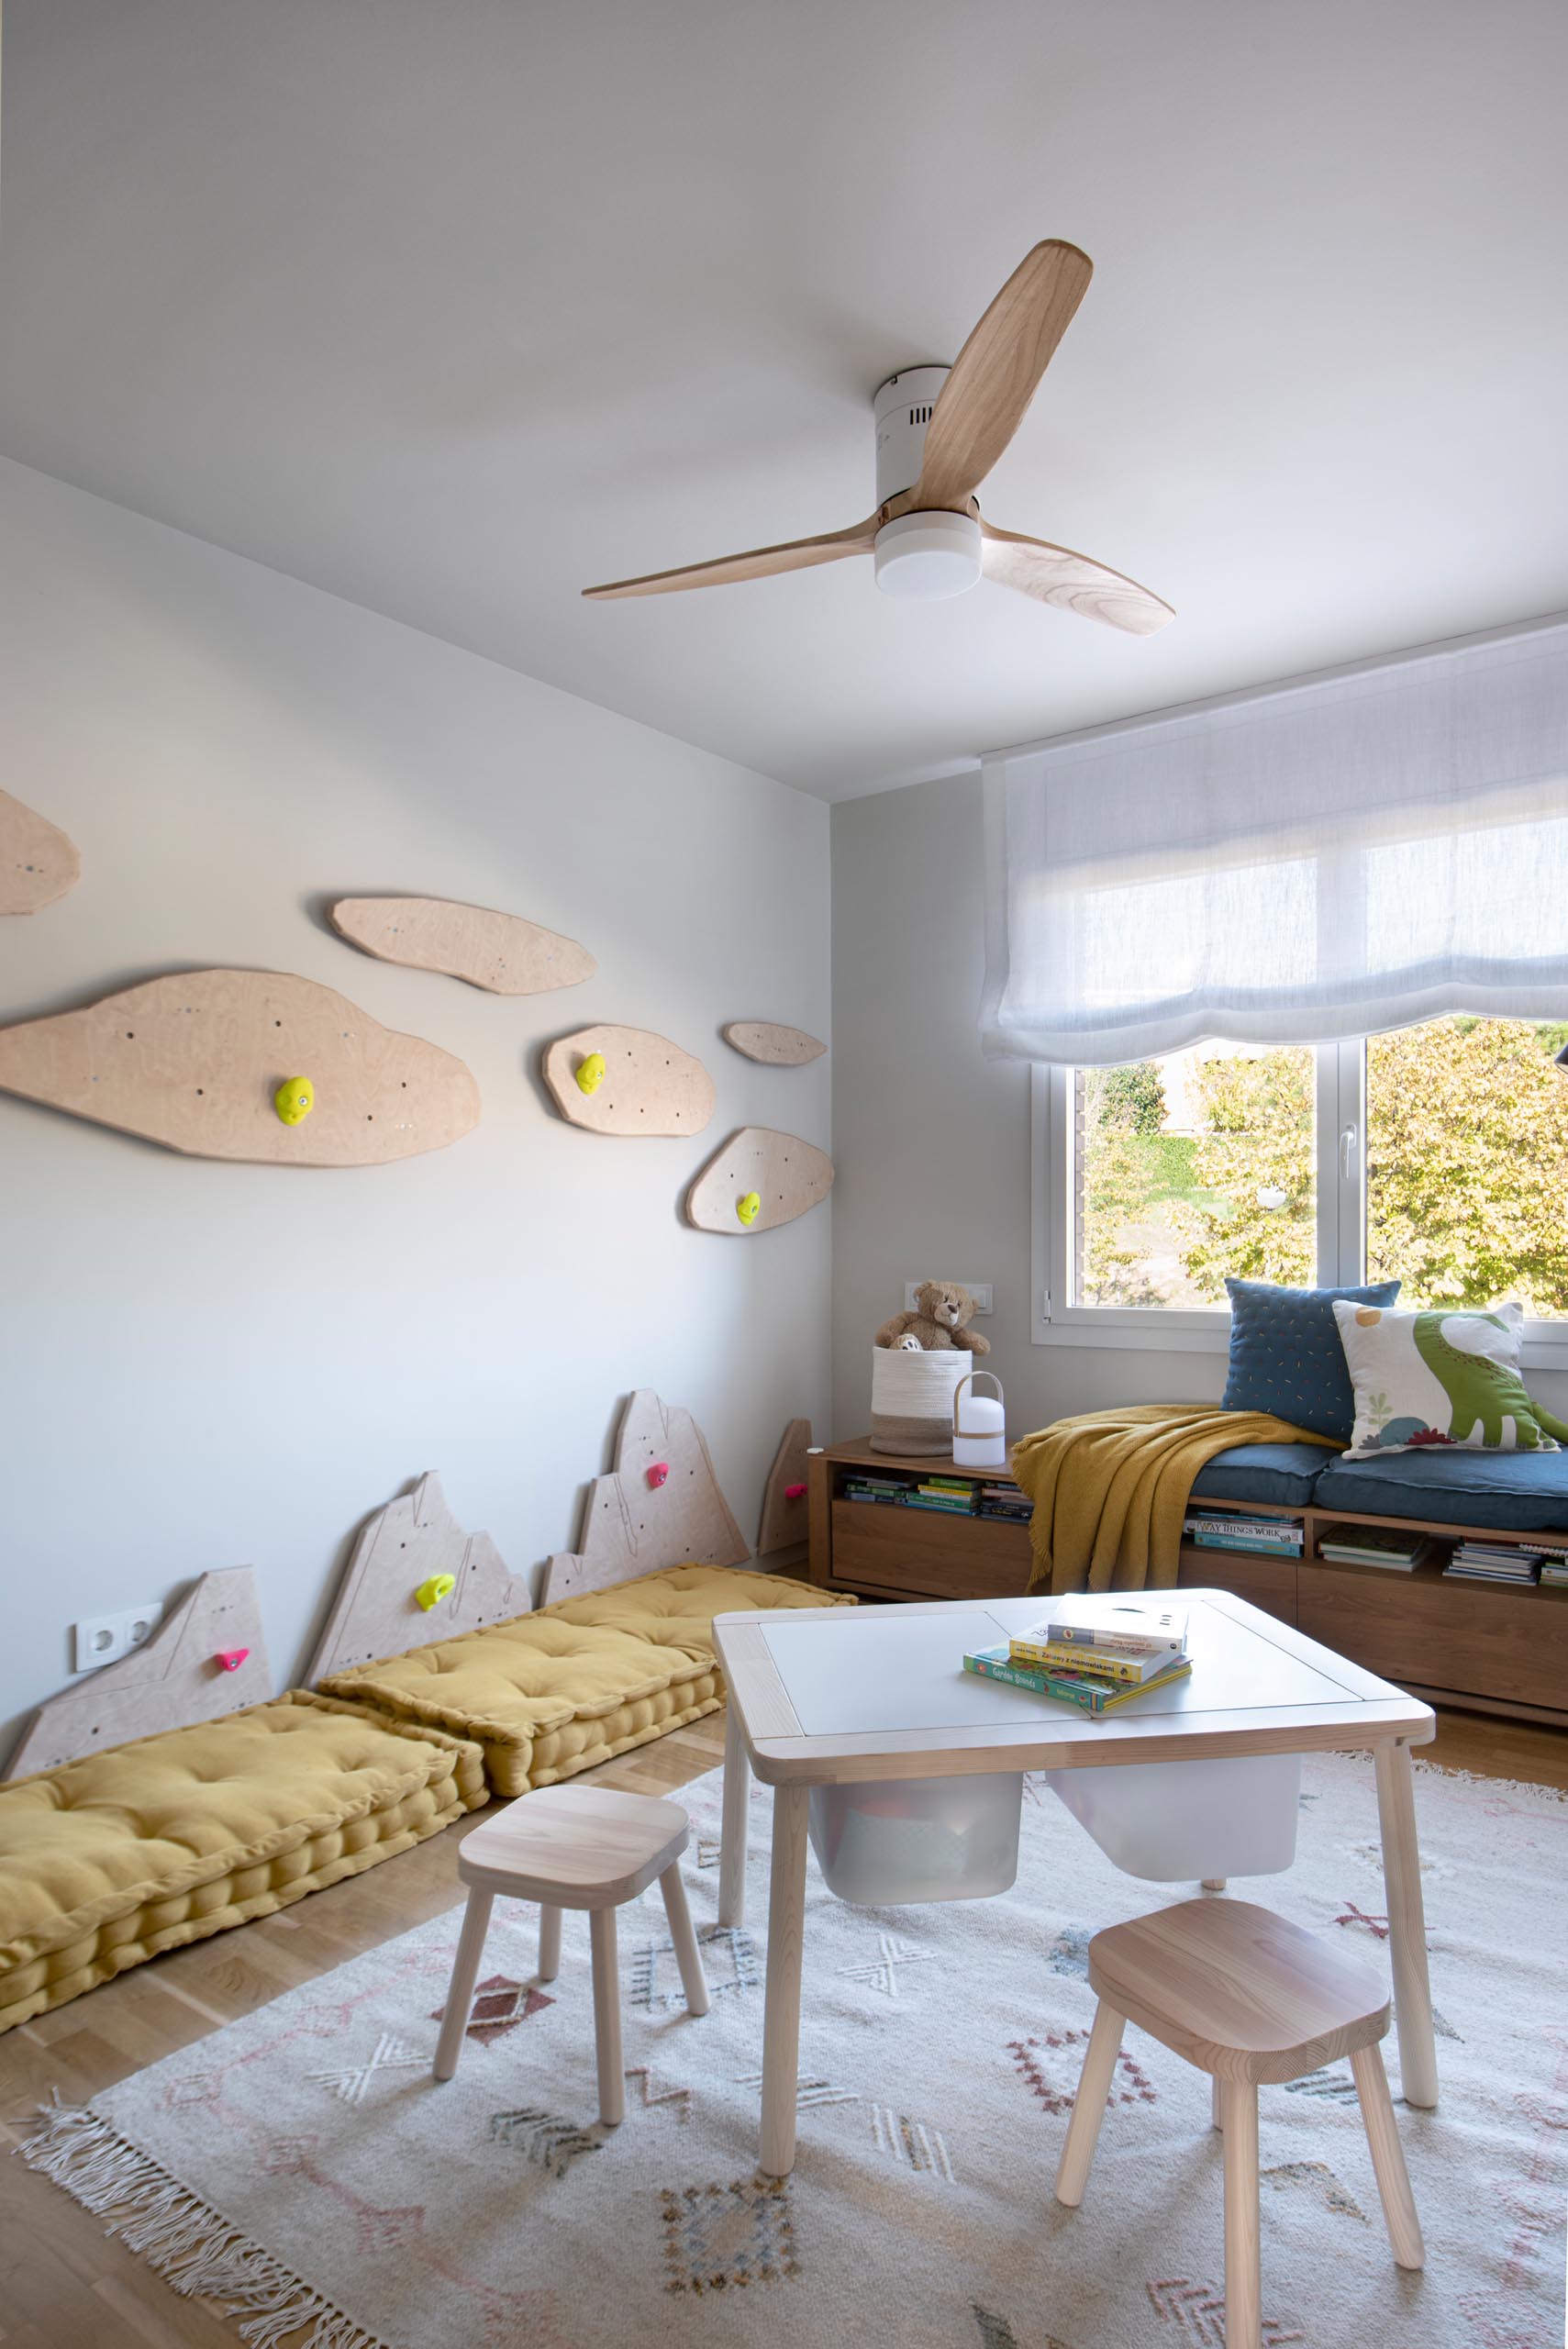 In this modern kid's bedroom, there's uniquely shaped wood cut-outs on the wall that have been designed to attach rock climbing mounts, turning the one empty wall into a climbing wall.